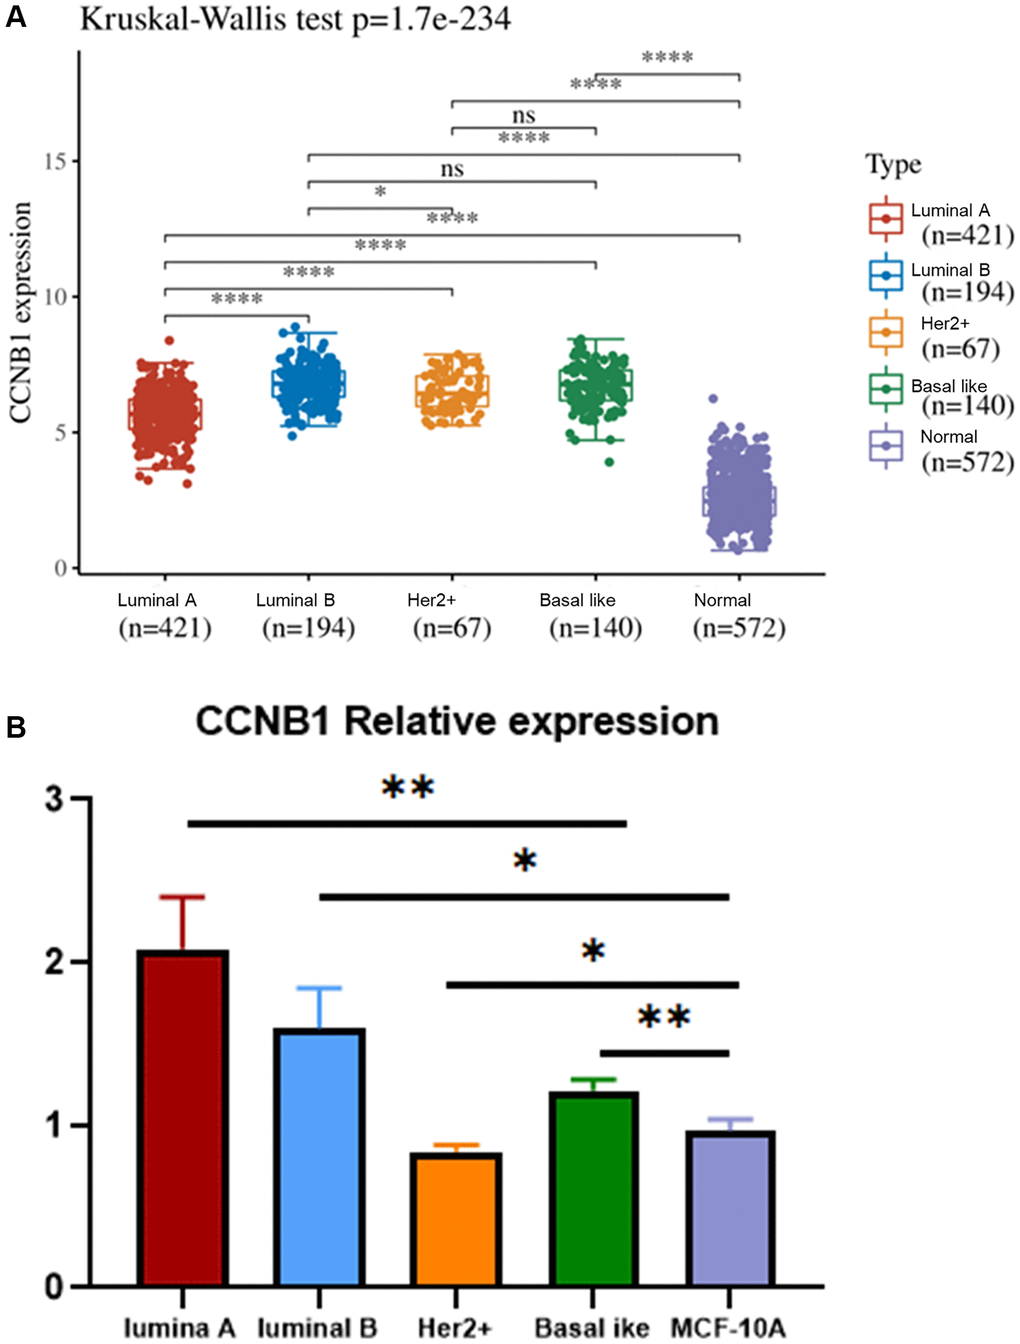 Expression of CCNB1 in different molecular subtyping of BC. (A) The relative expression of CCNB1 in luminal A, luminal B, Her2+, basal like and MCF 10A cell lines. CCNB1 expression was higher in the four molecular subtyping of BC (luminal A, luminal B, Her2+, basal like) than in the normal group. (B) Compared with the MCF 10A cell line, CCNB1 was up-regulated in luminal A, luminal B and basal-like cell lines, but down-regulated in Her2+ cell line, as verified by qRT-PCR. *p **p ***p 